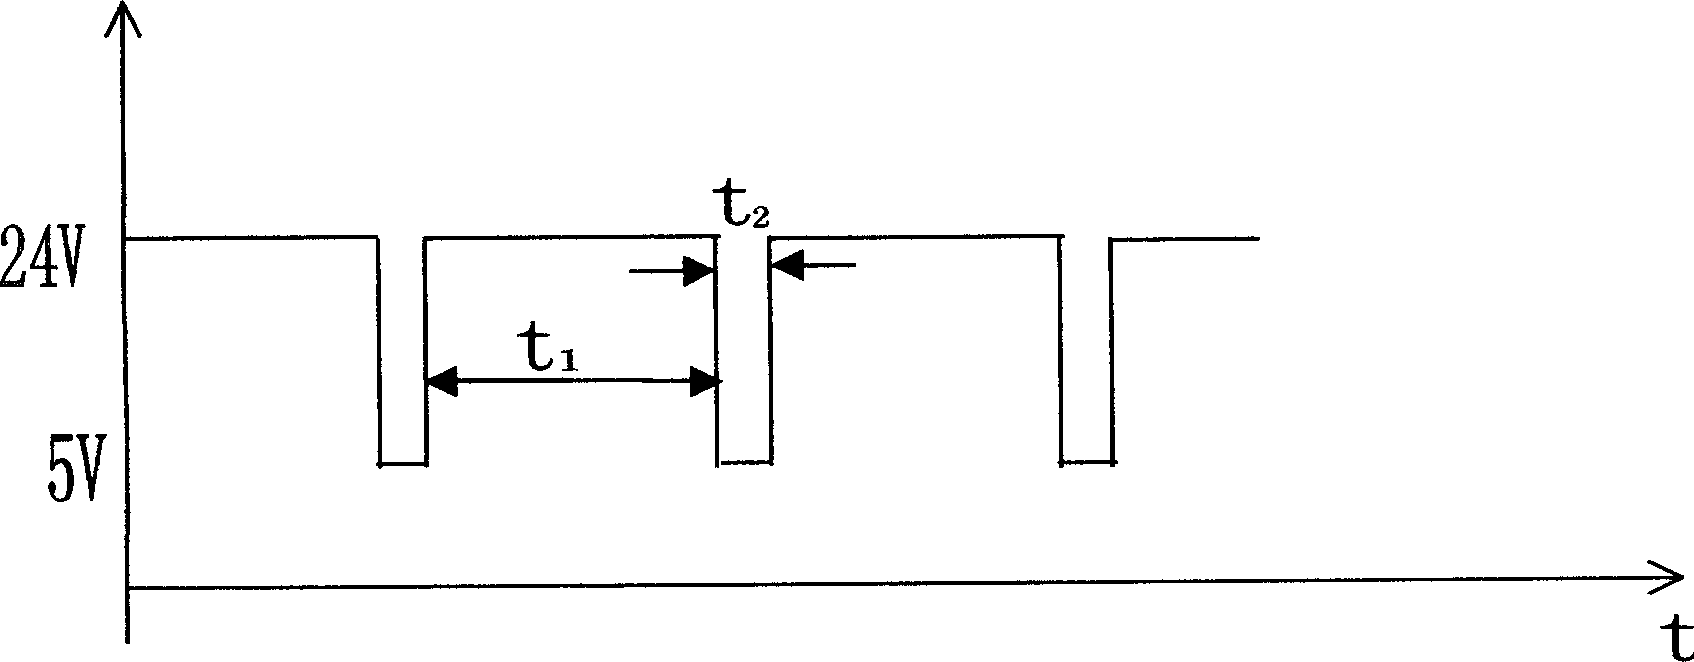 Method for measuring and controlling temp of electrothermal body